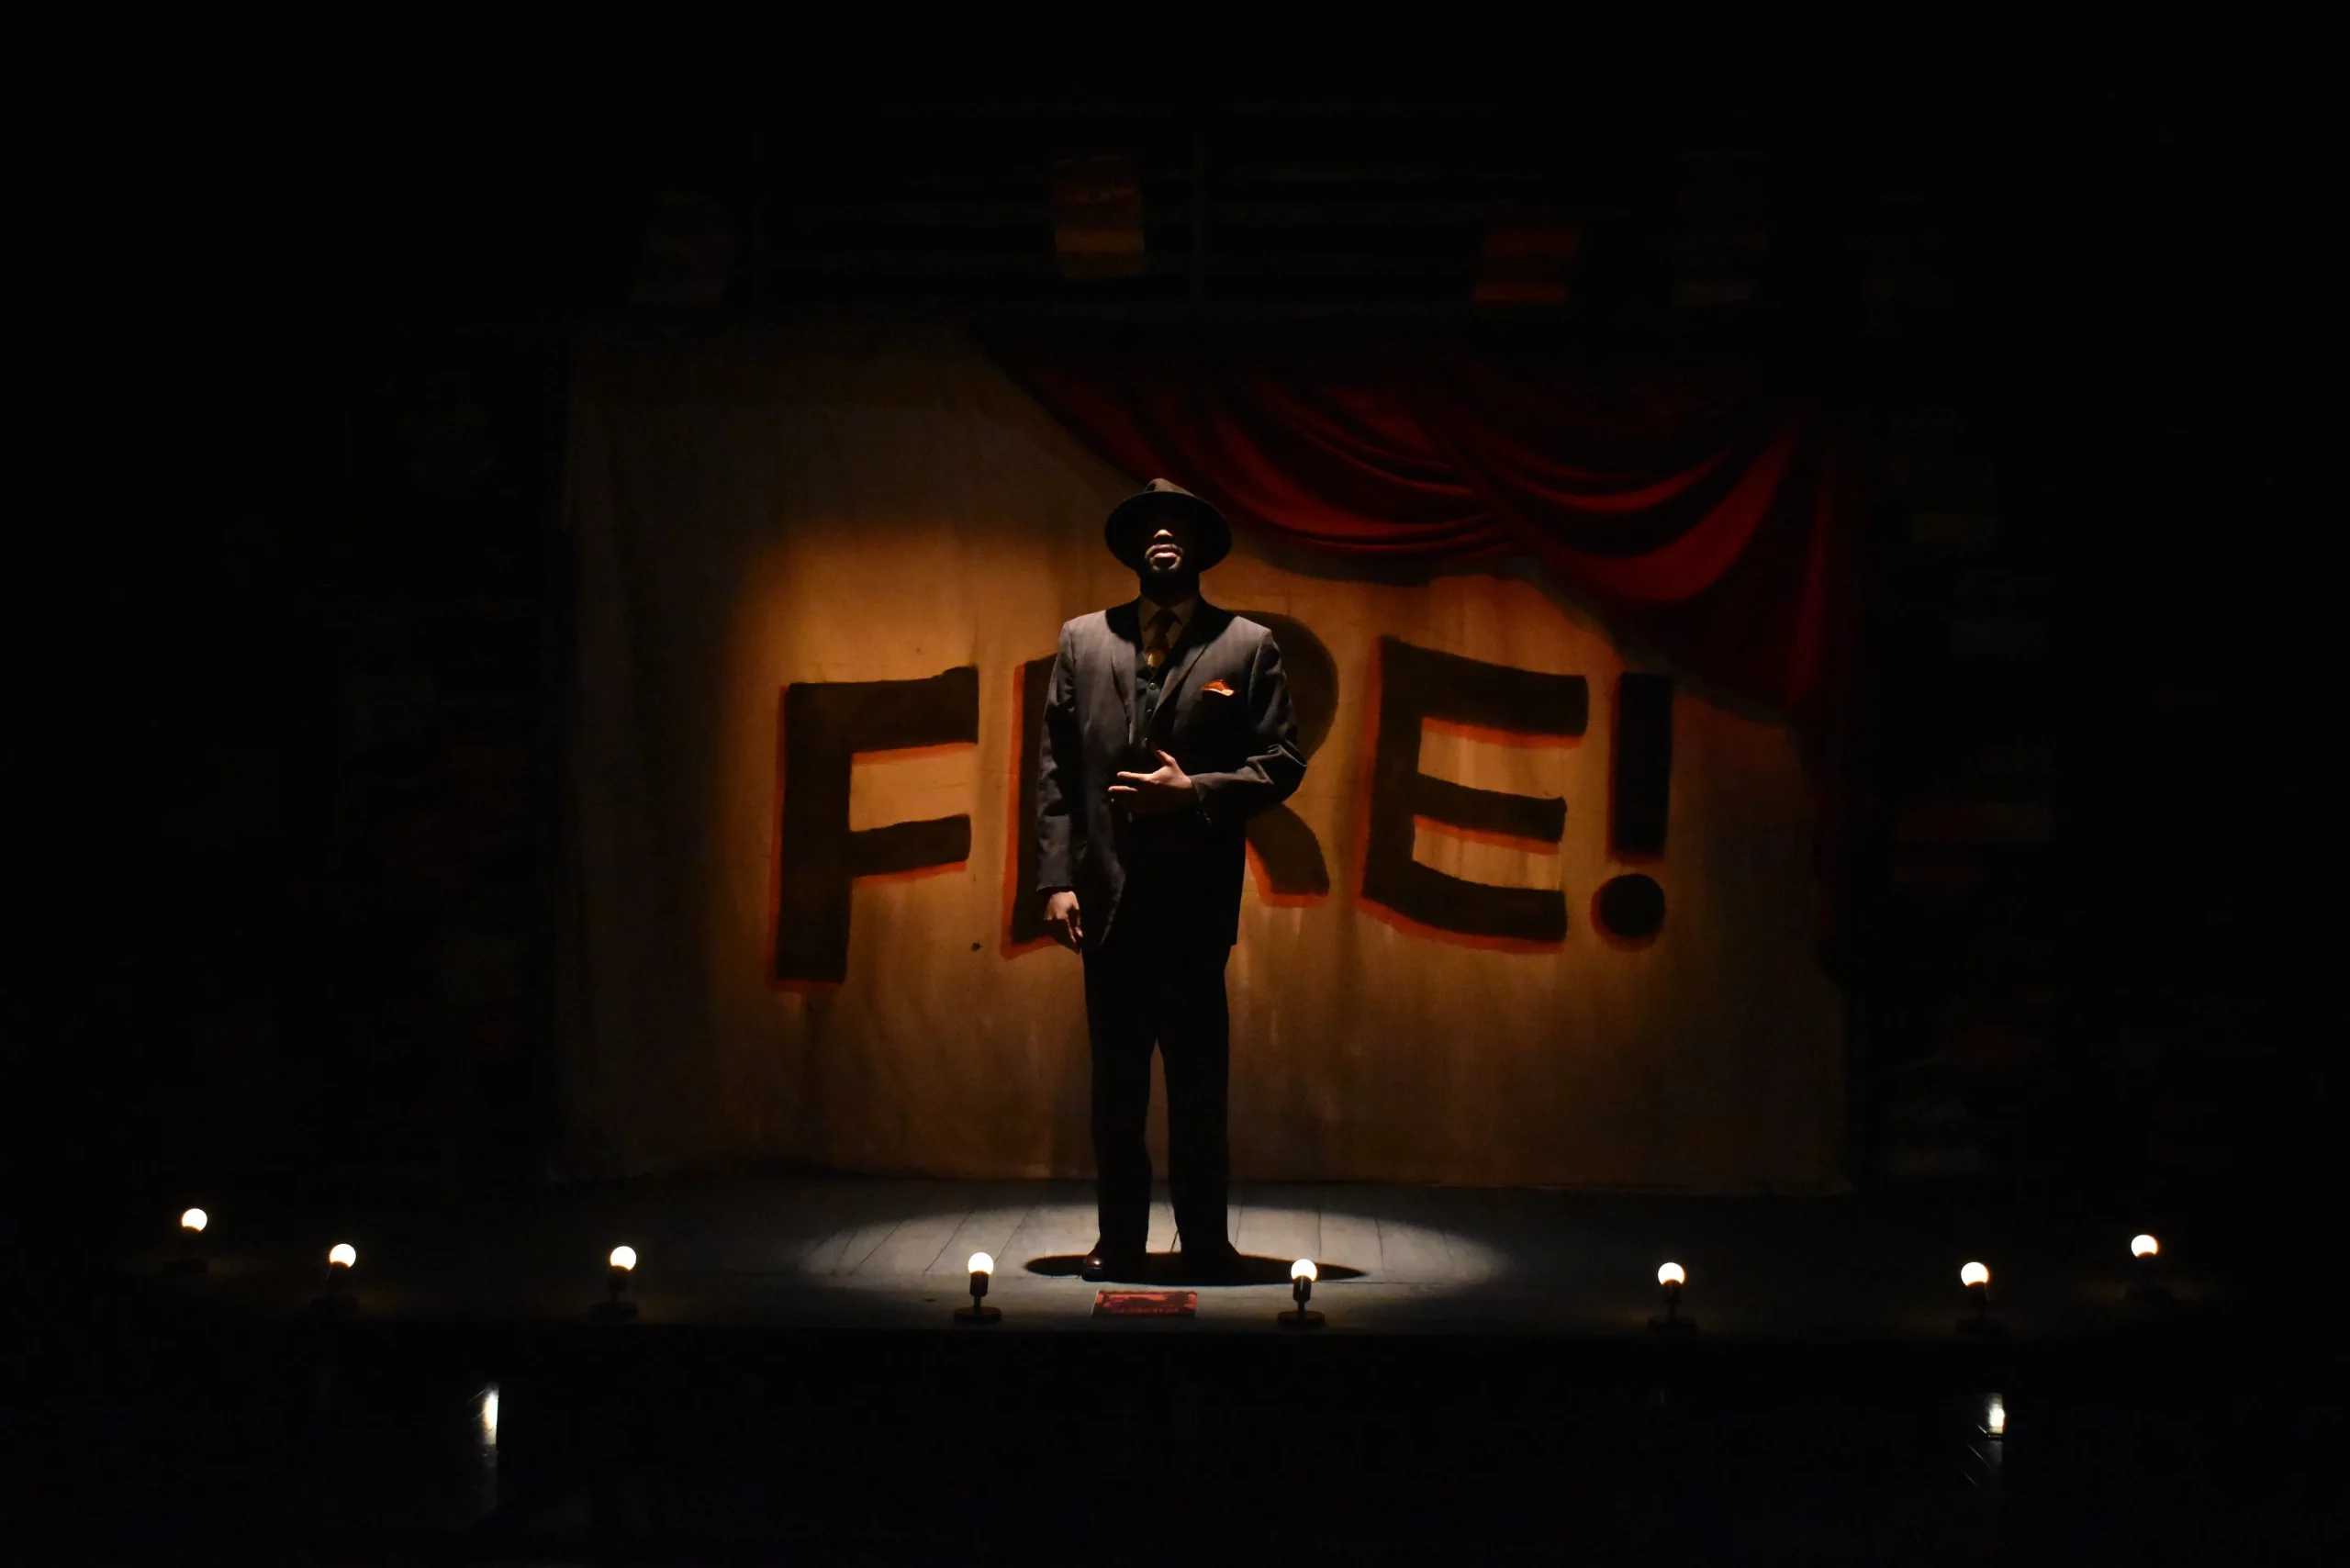 A man stands on center stage shrouded in dark. Behind him read the words, "Fire!"